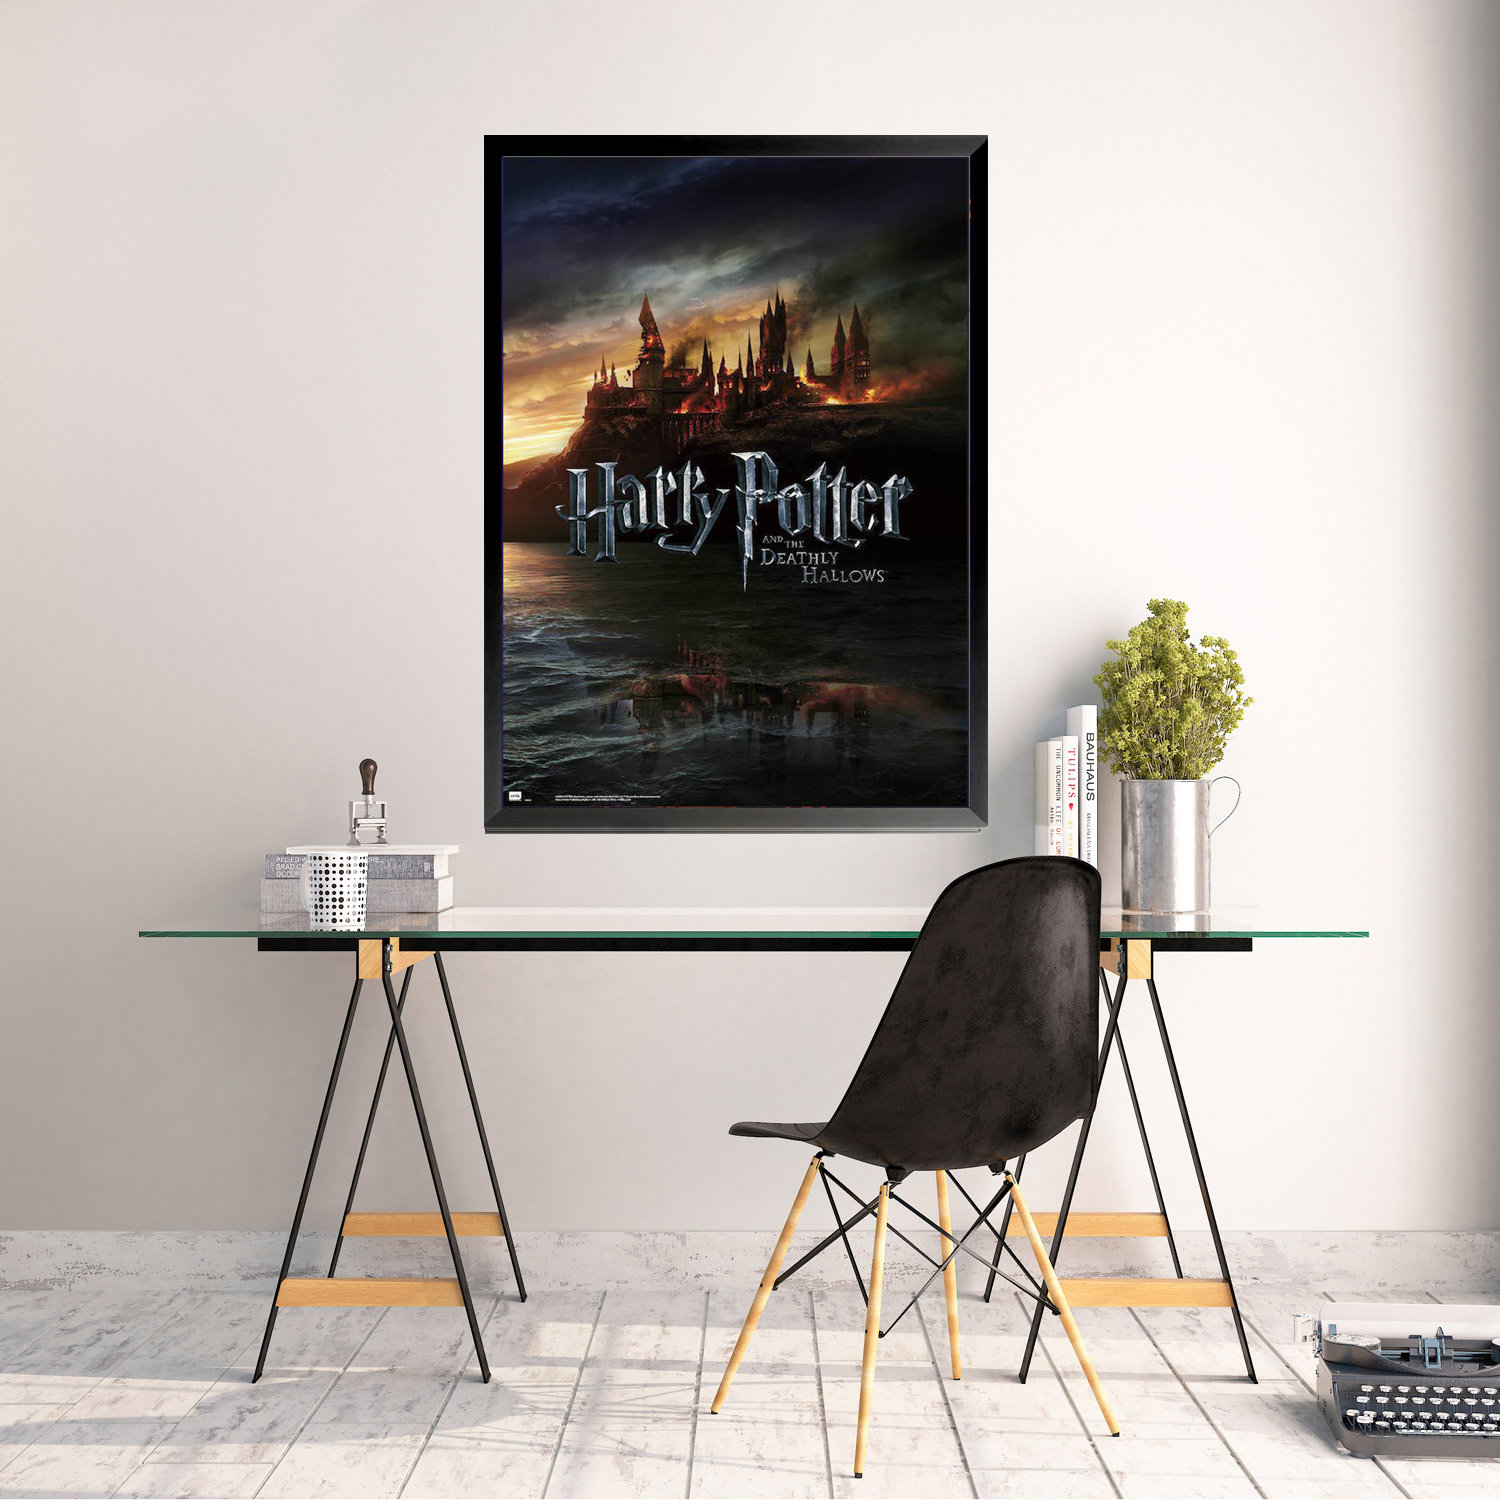 Art Print Poster Harry Potter: Deathly Hallows Part 2 Movie Film Wall Decor  Gift